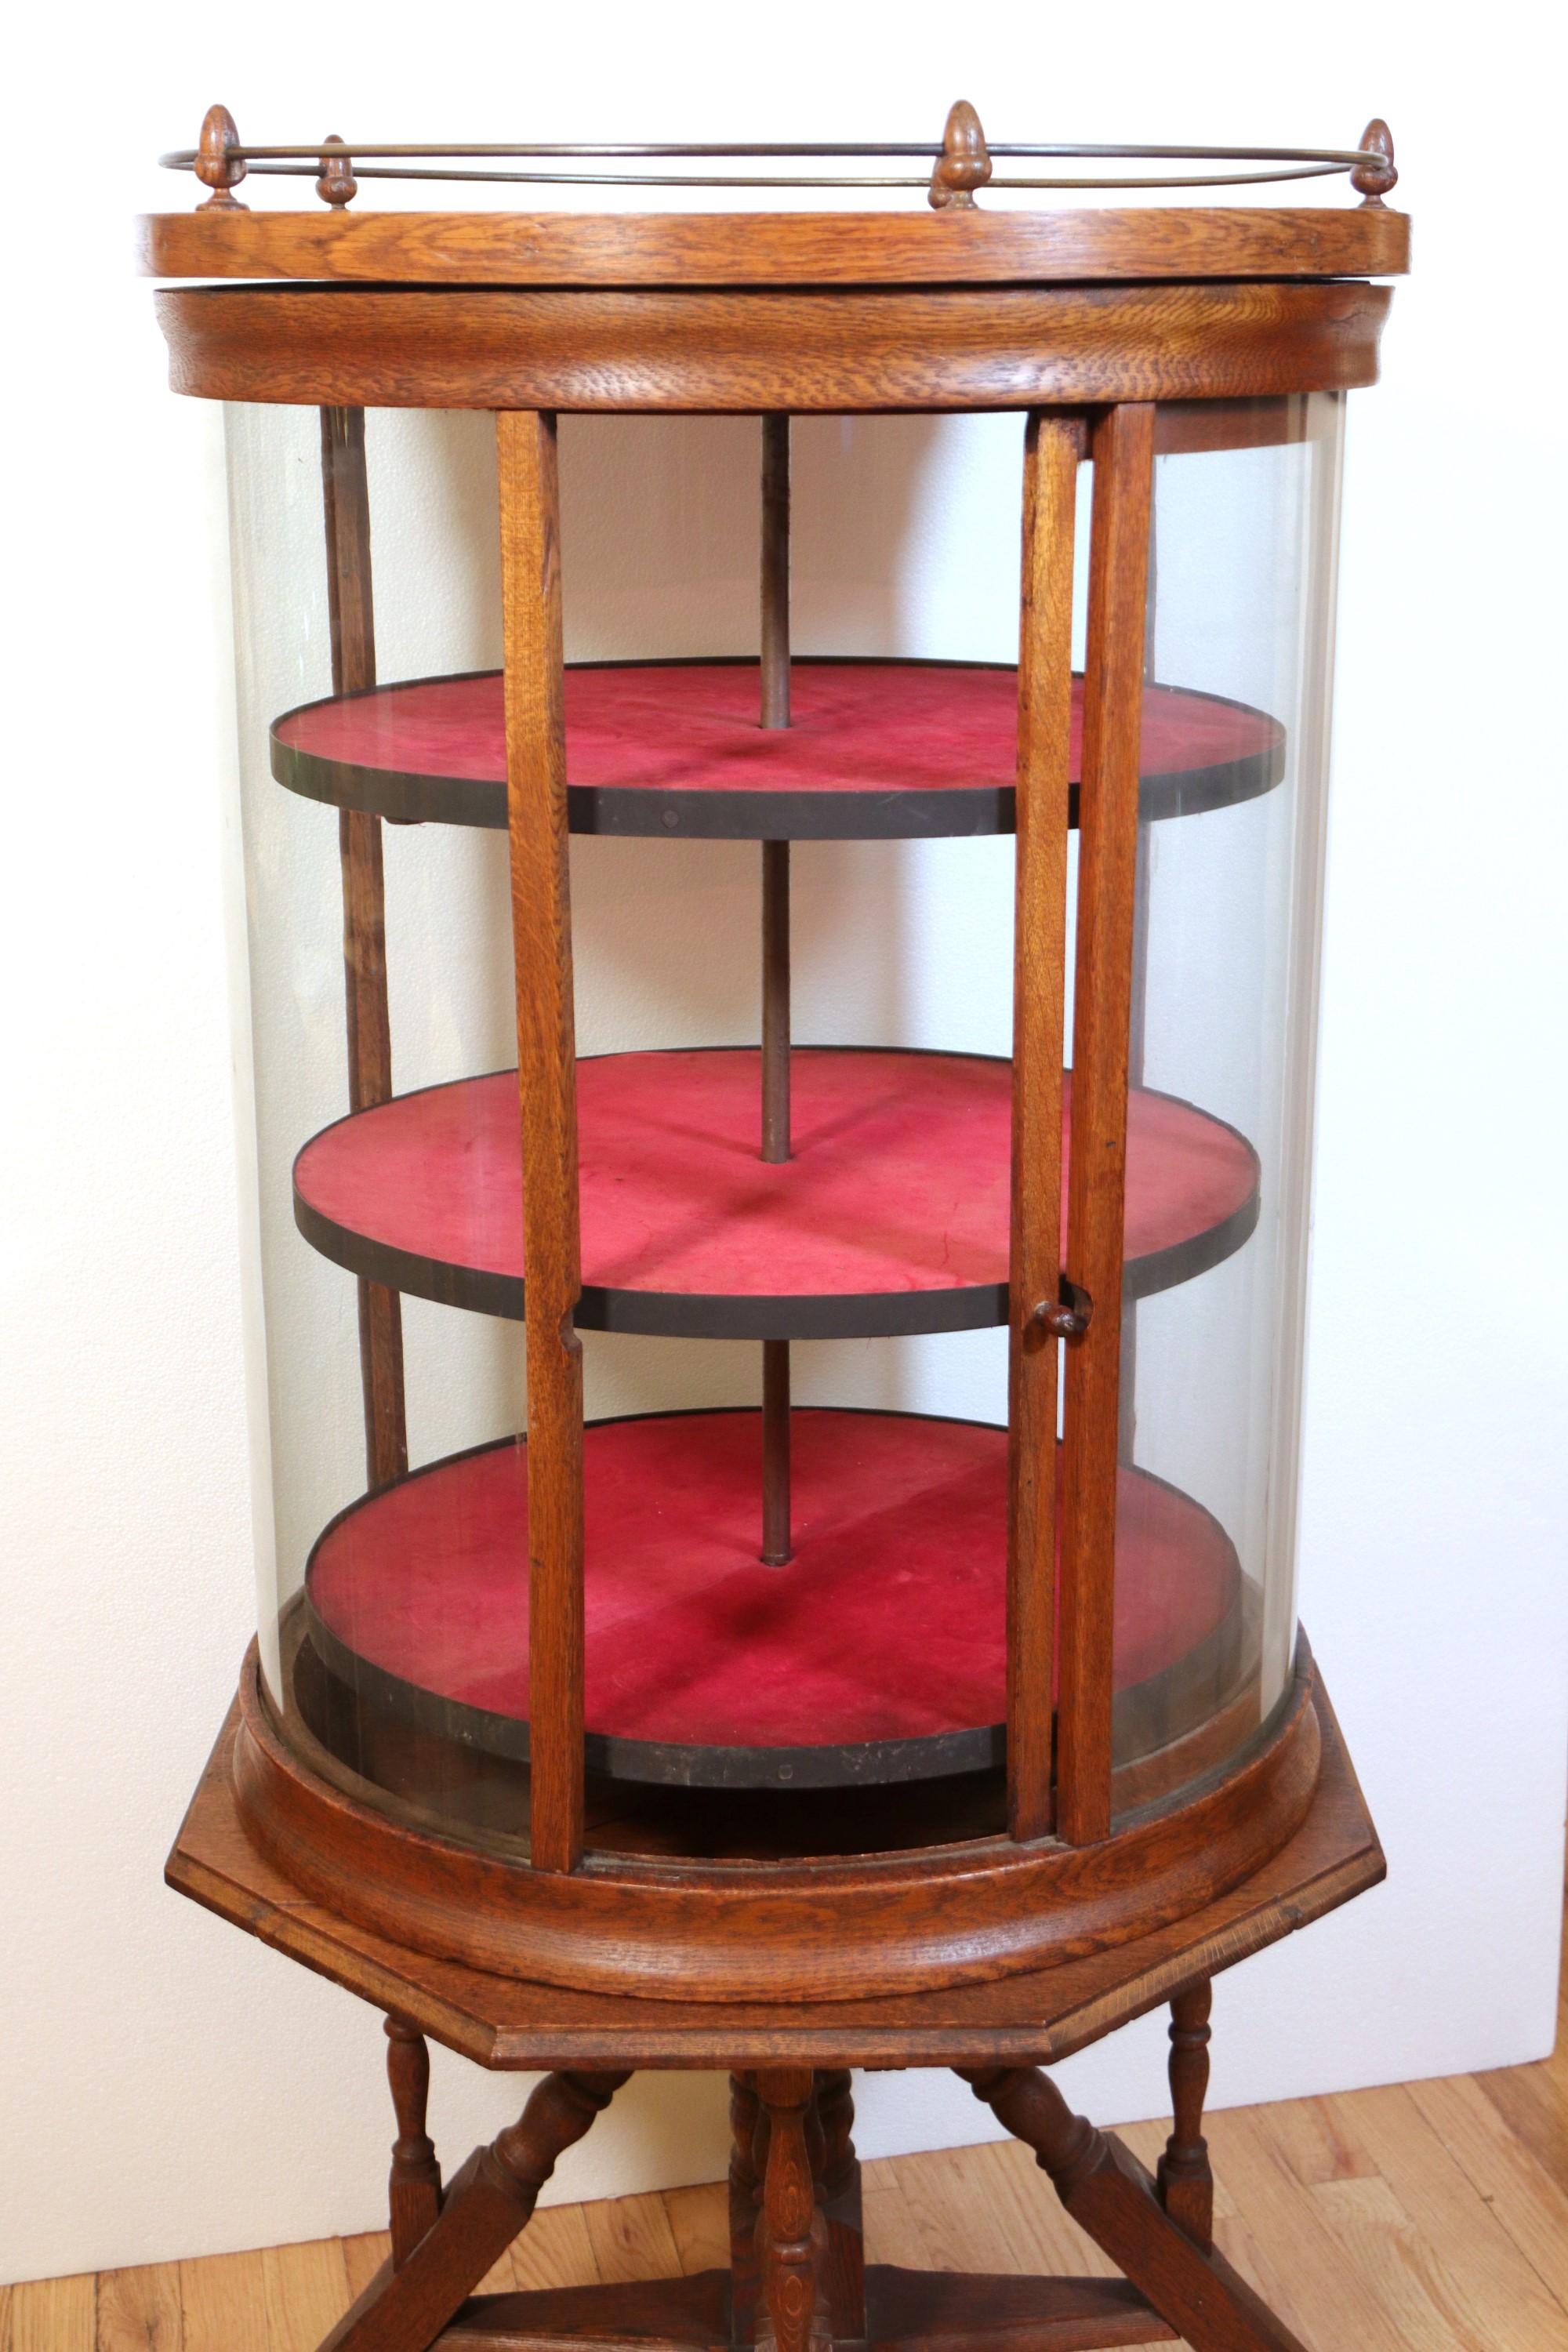 20th Century Oak Round Revolving Display Case w/ 3 Shelves & Spindle Legs, Antique